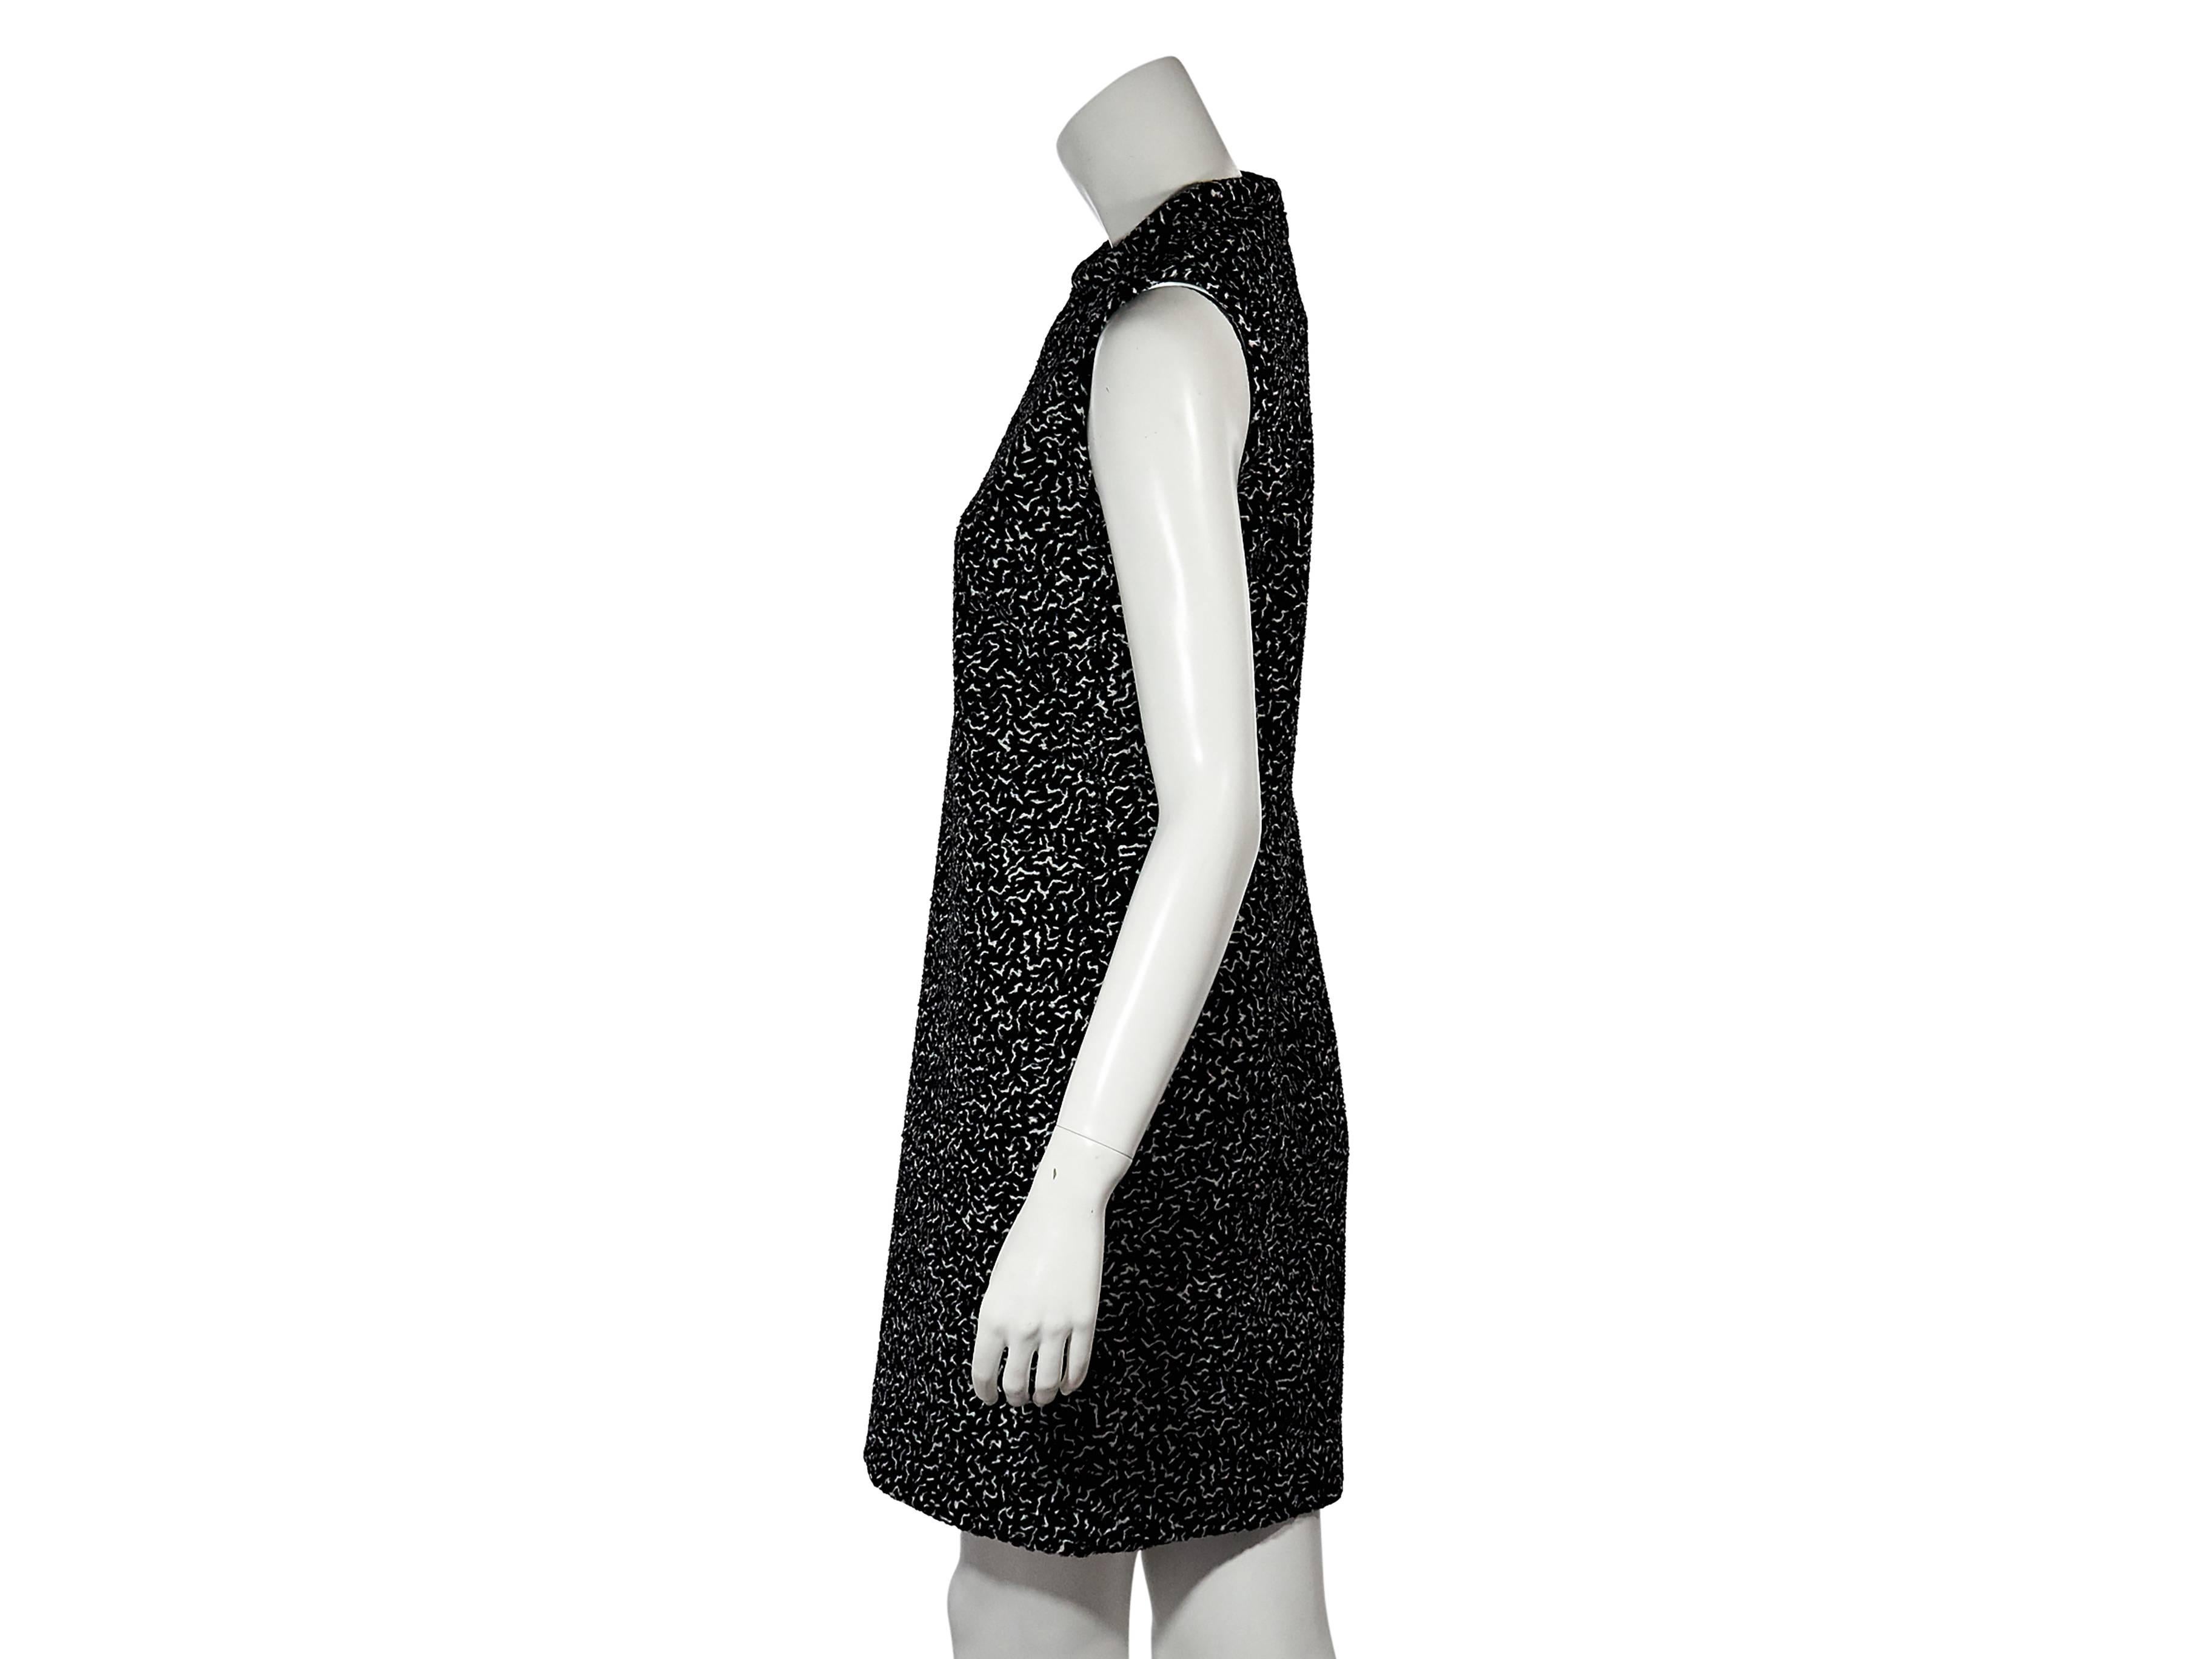 Product details: Black and white printed shift dress by Proenza Schouler. Crewneck. Sleeveless. Concealed back zip closure. 
Condition: New with tags. 
Est. Retail $ 2,980.00